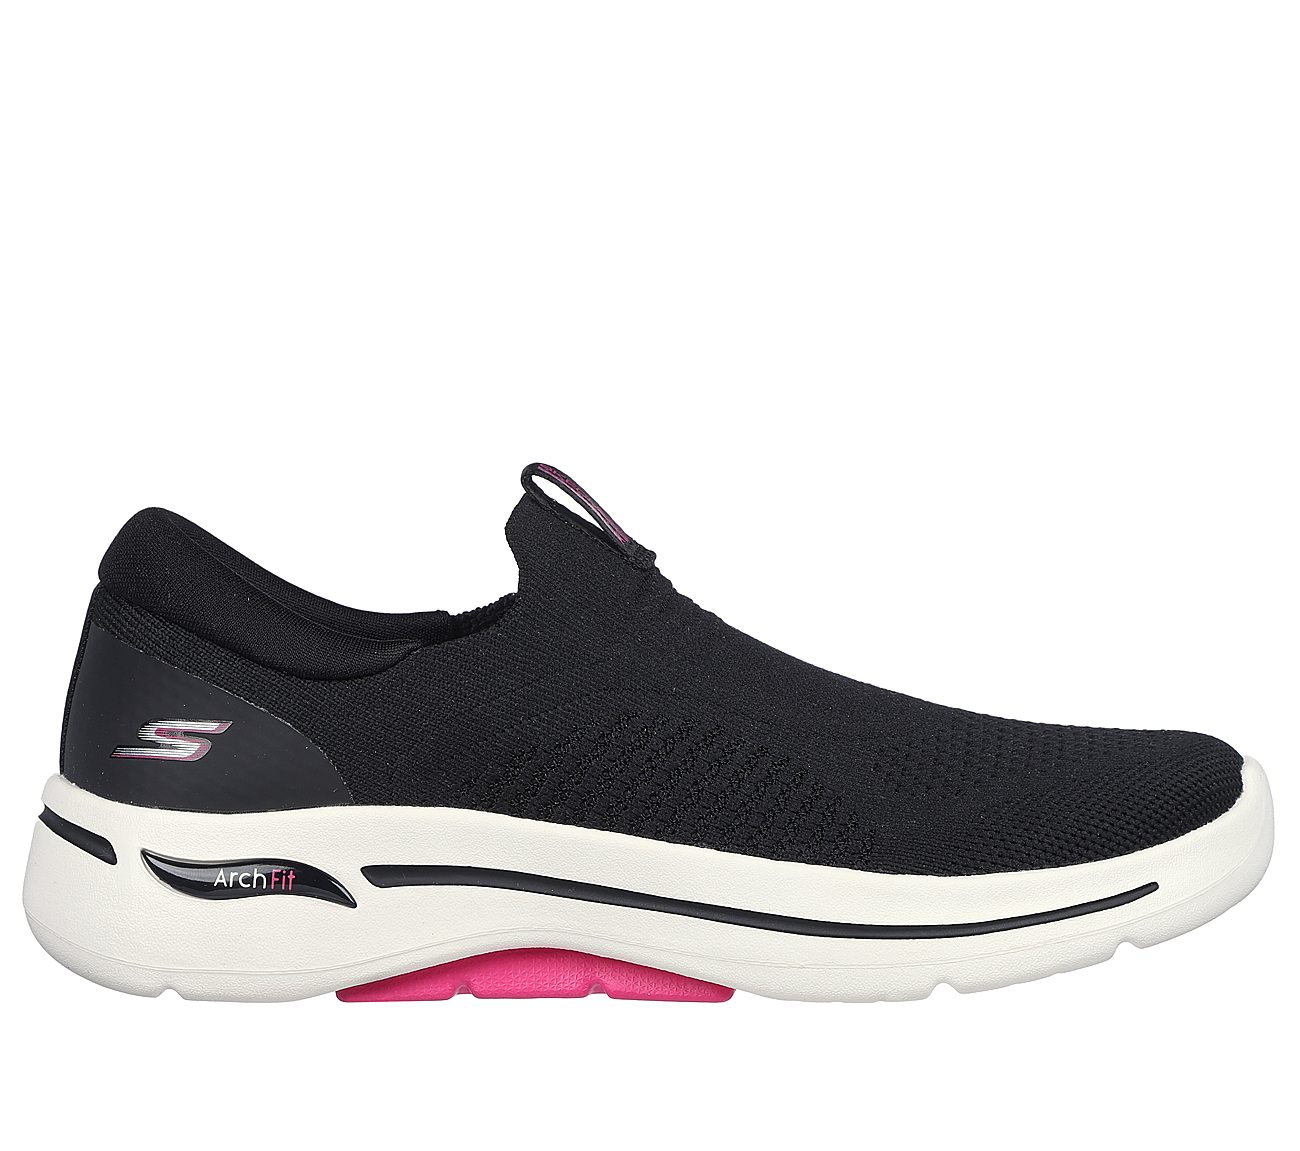 GO WALK ARCH FIT, BLACK/HOT PINK Footwear Lateral View